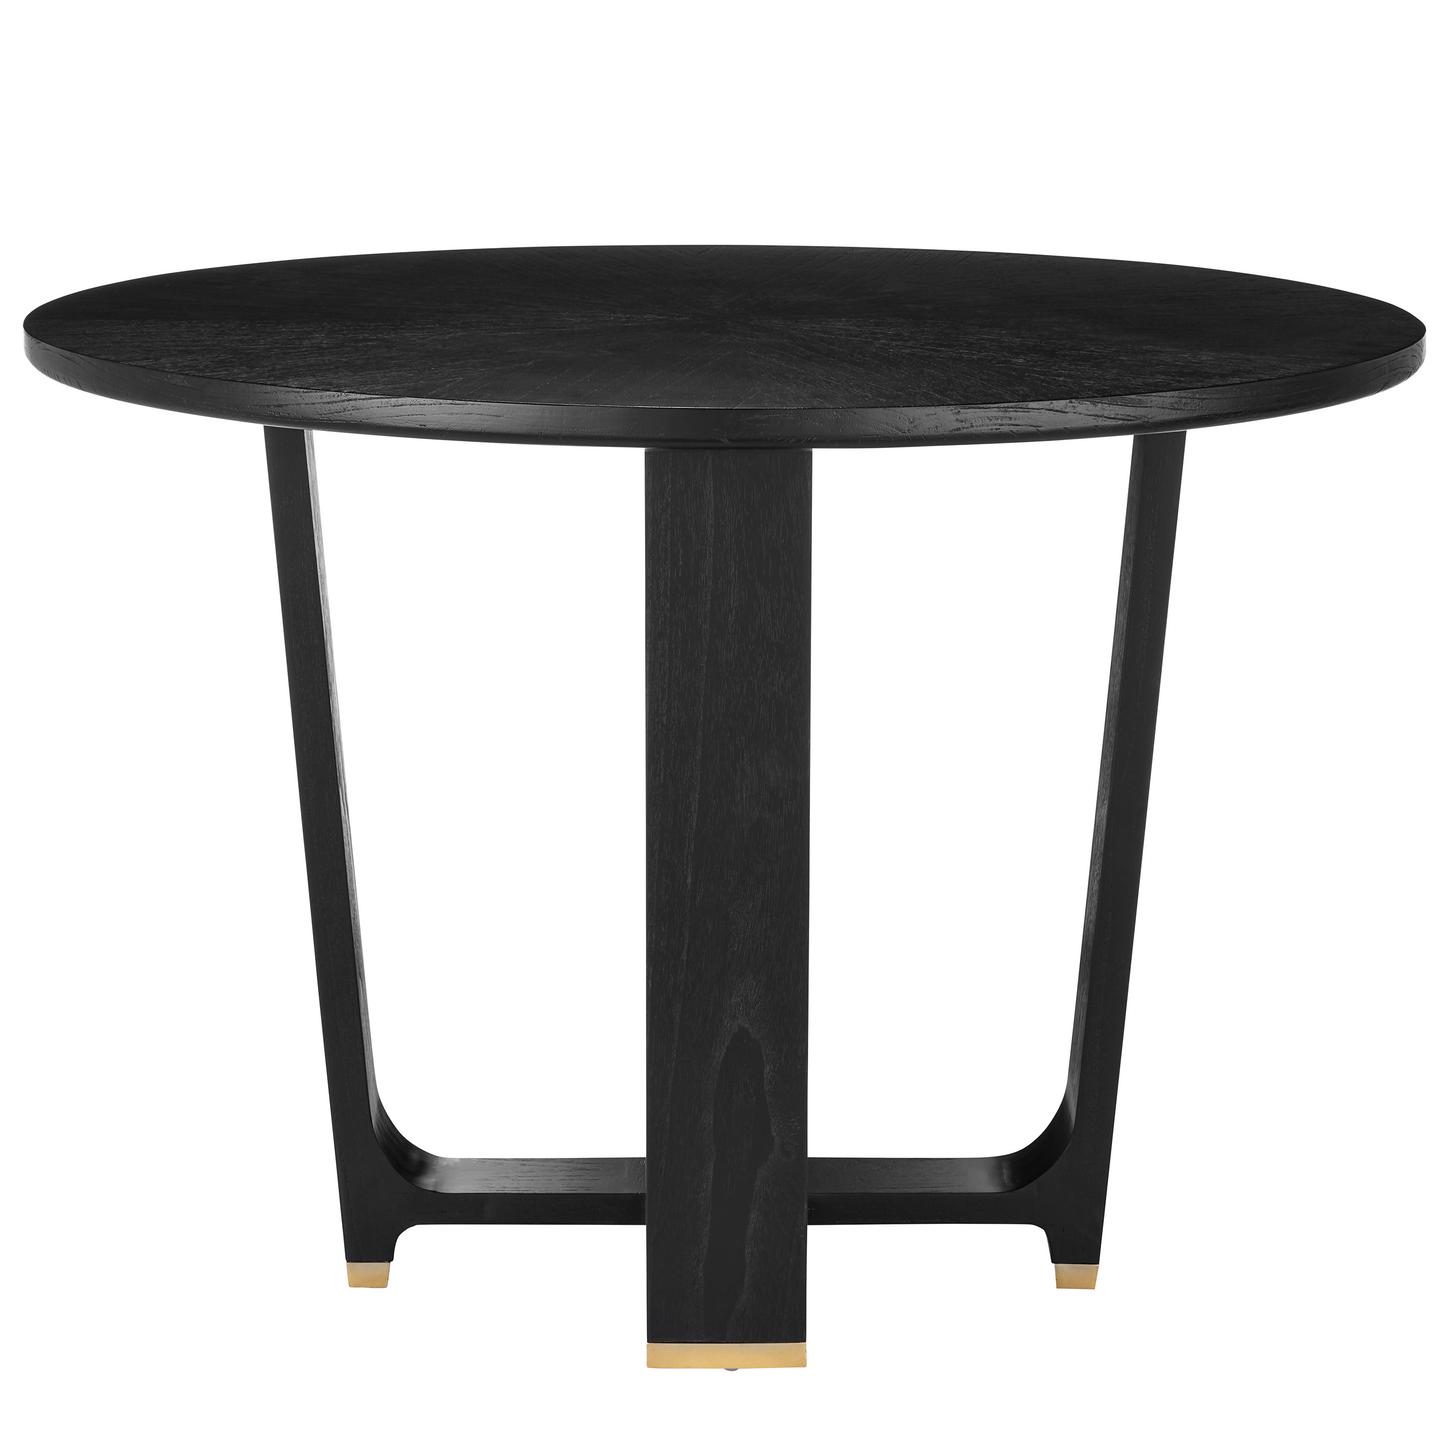 The Blake Black Dining Table by Currey & Company | Luxury Dining Tables | Willow & Albert Home